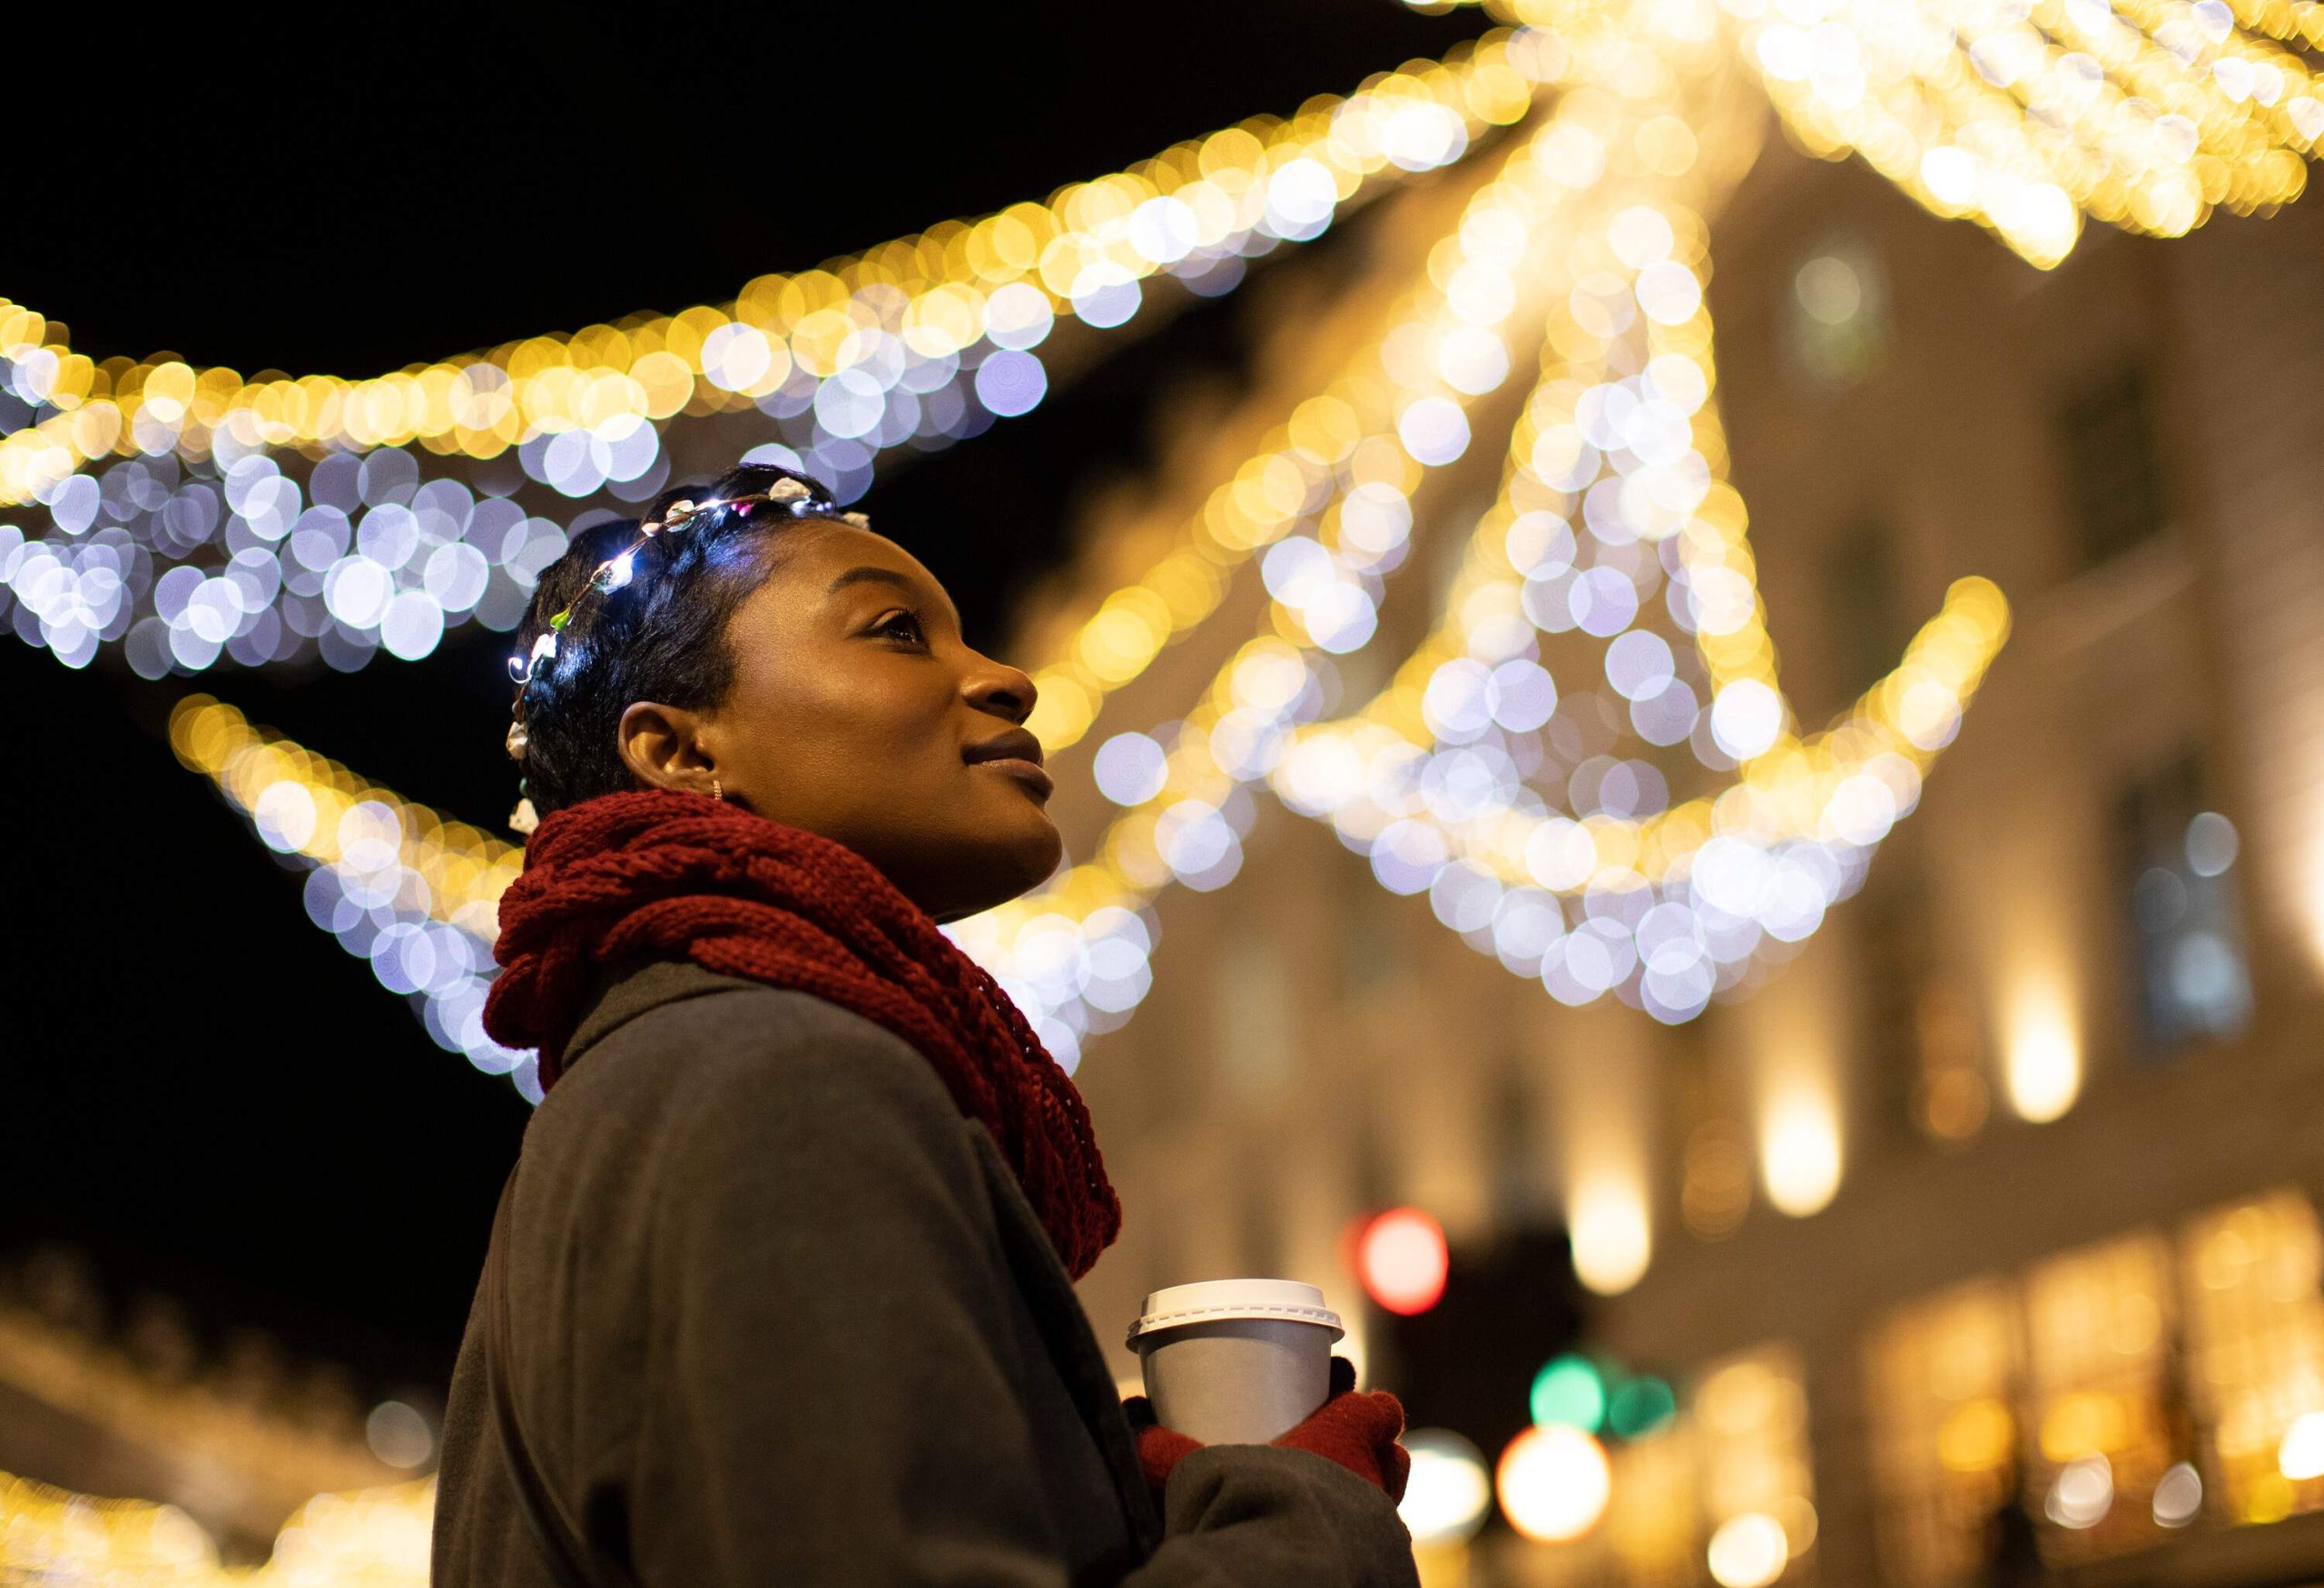 Carefree young woman in lit Christmas headband drinking coffee in city with lights at night